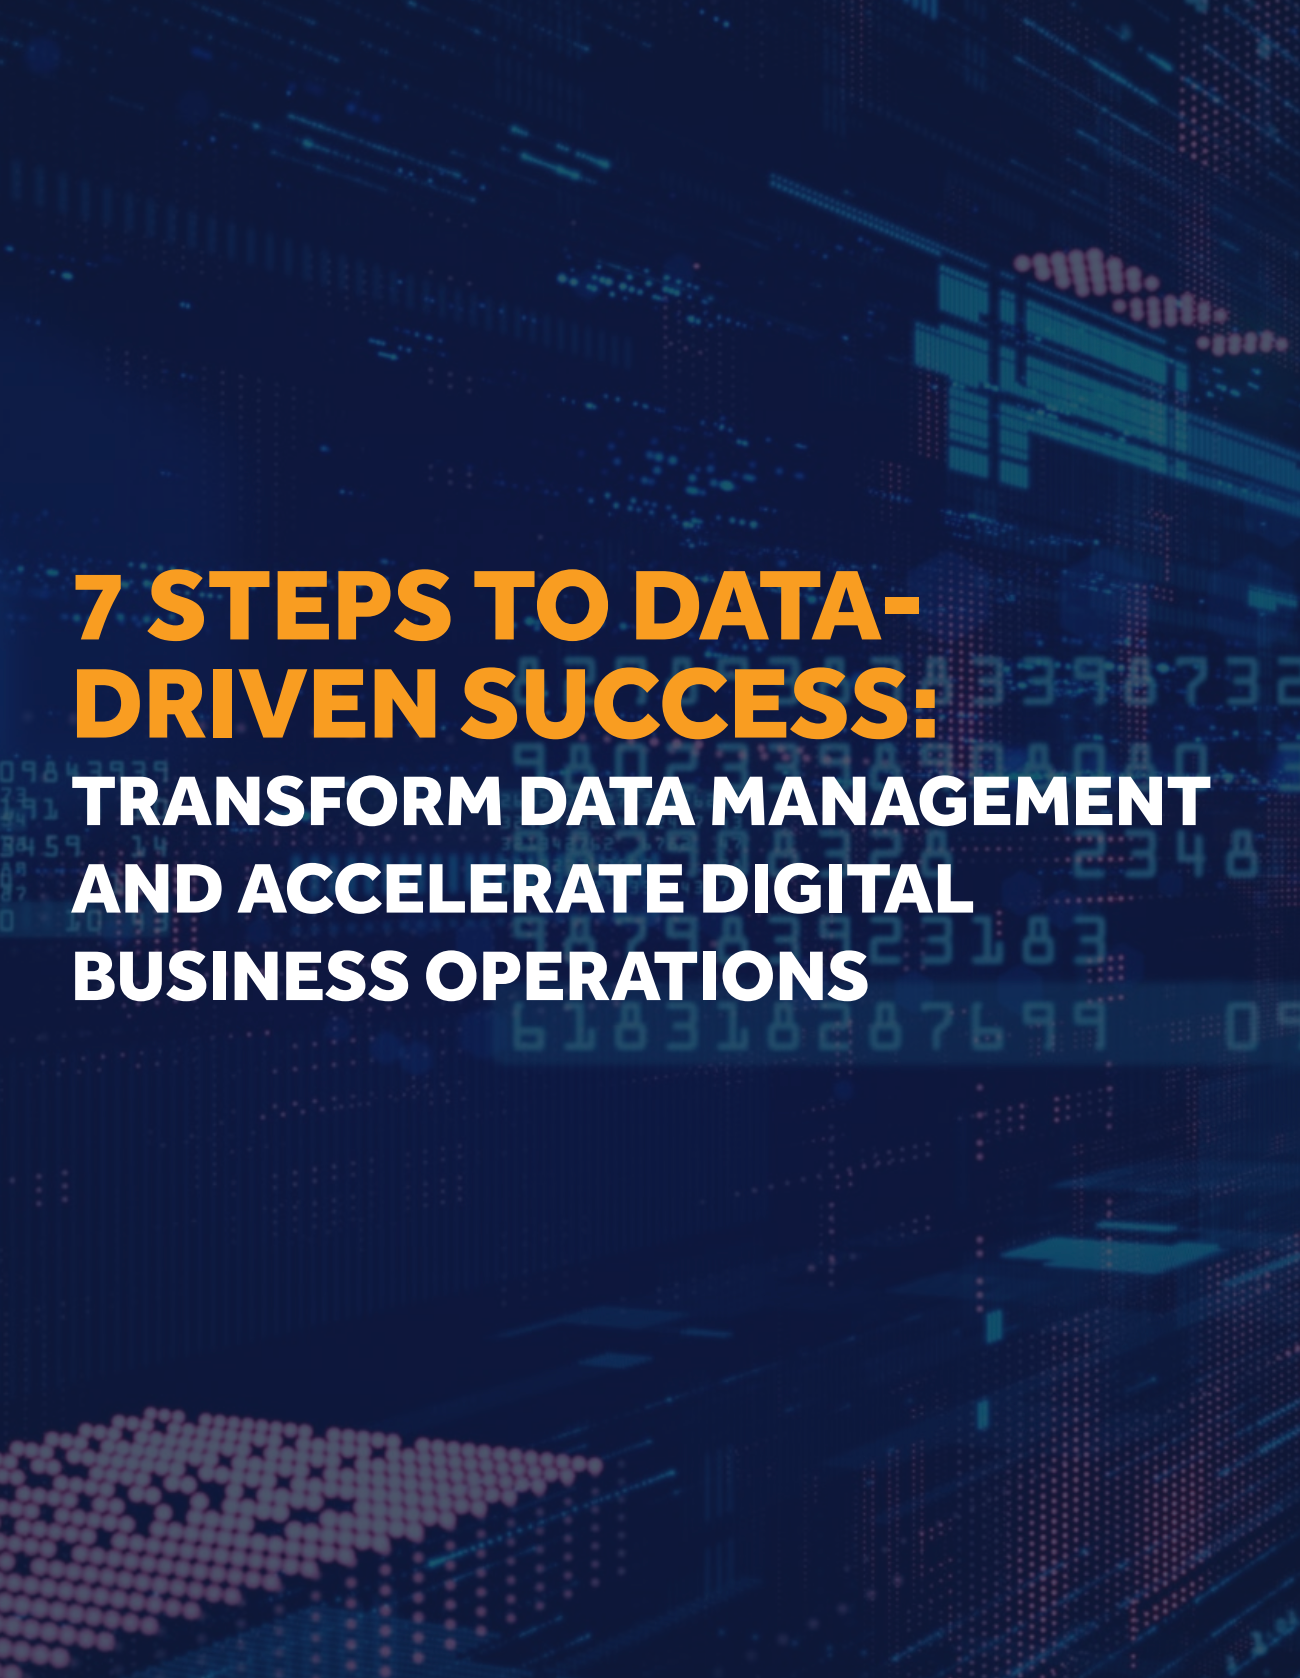 7 Steps to Data-Driven Success eBook